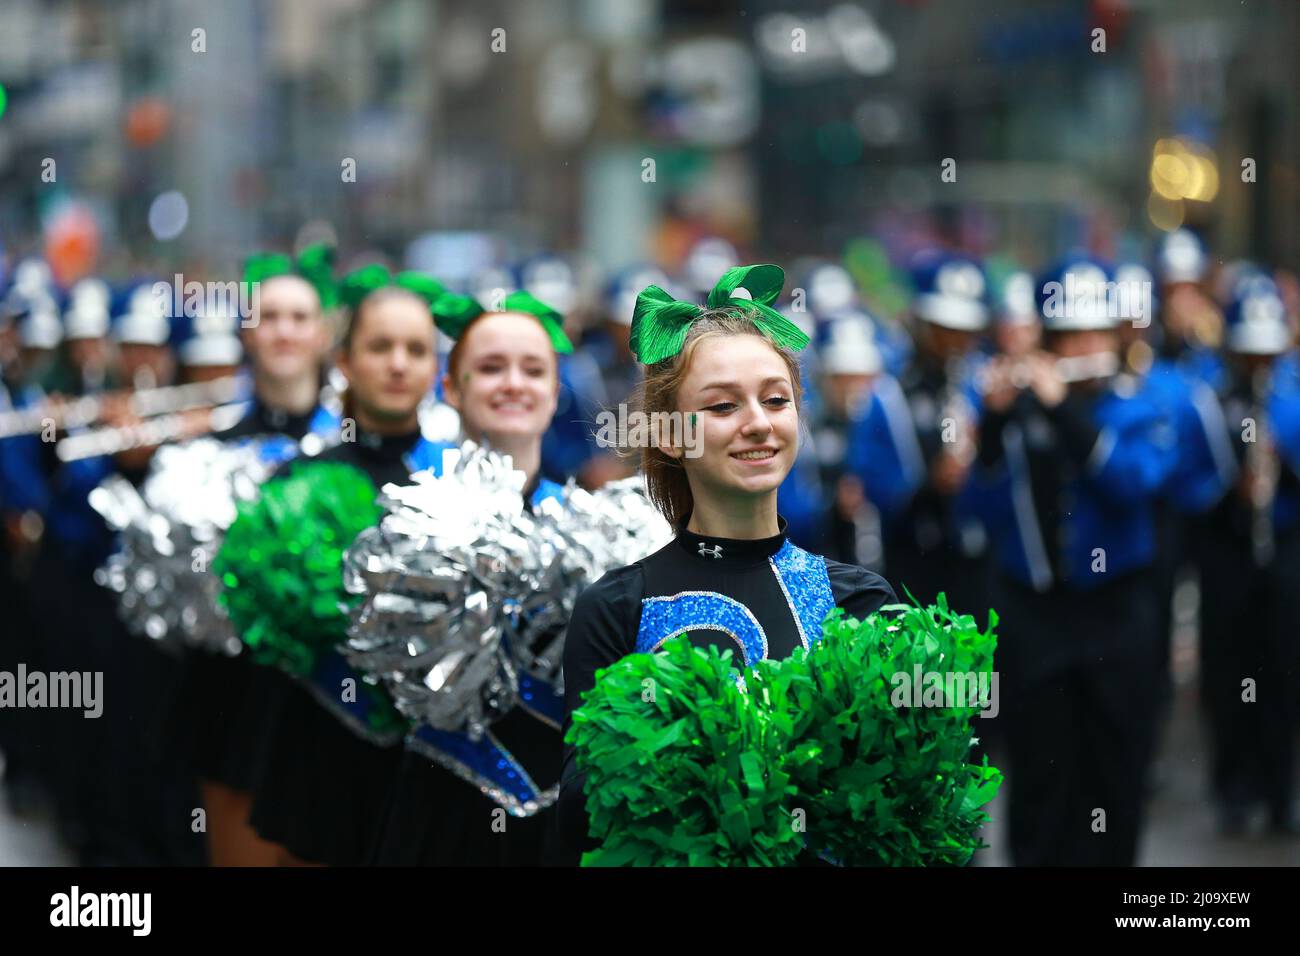 NEW YORK, NEW YORK - March 17, 2022: Members of the North Babylon High School in the St. Patrick's Day Parade, March 17, 2022, in New York. (Photo: Gordon Donovan) Stock Photo